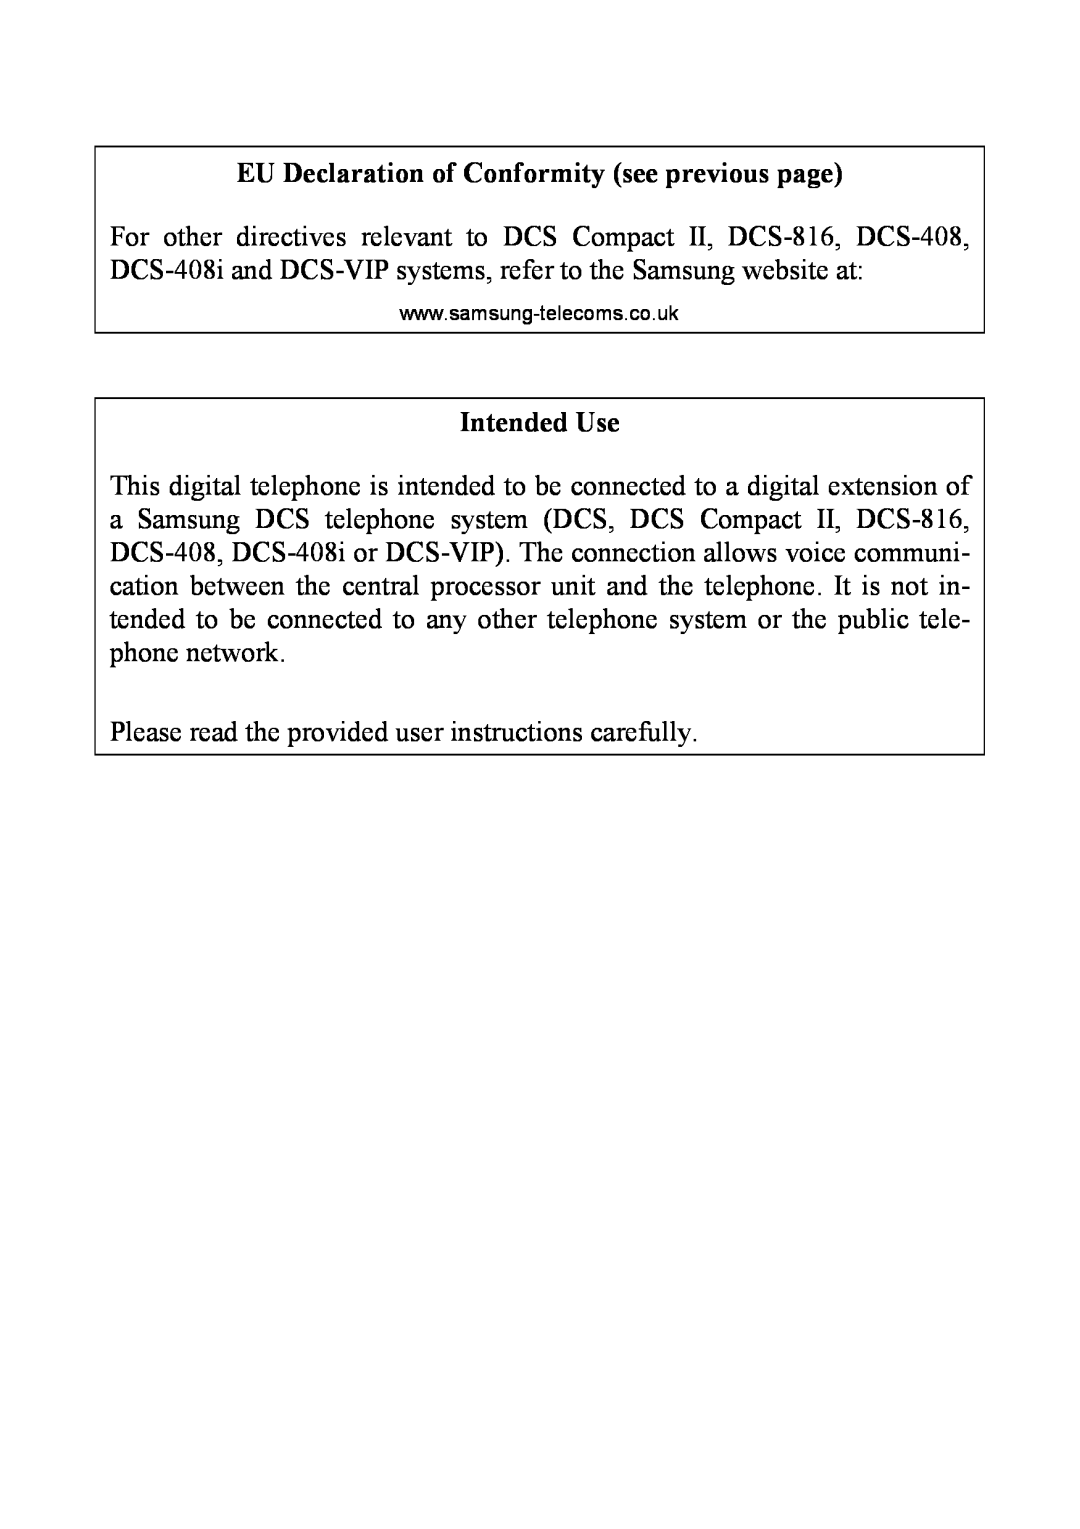 Samsung DCS KEYSET manual EU Declaration of Conformity see previous page, Intended Use 